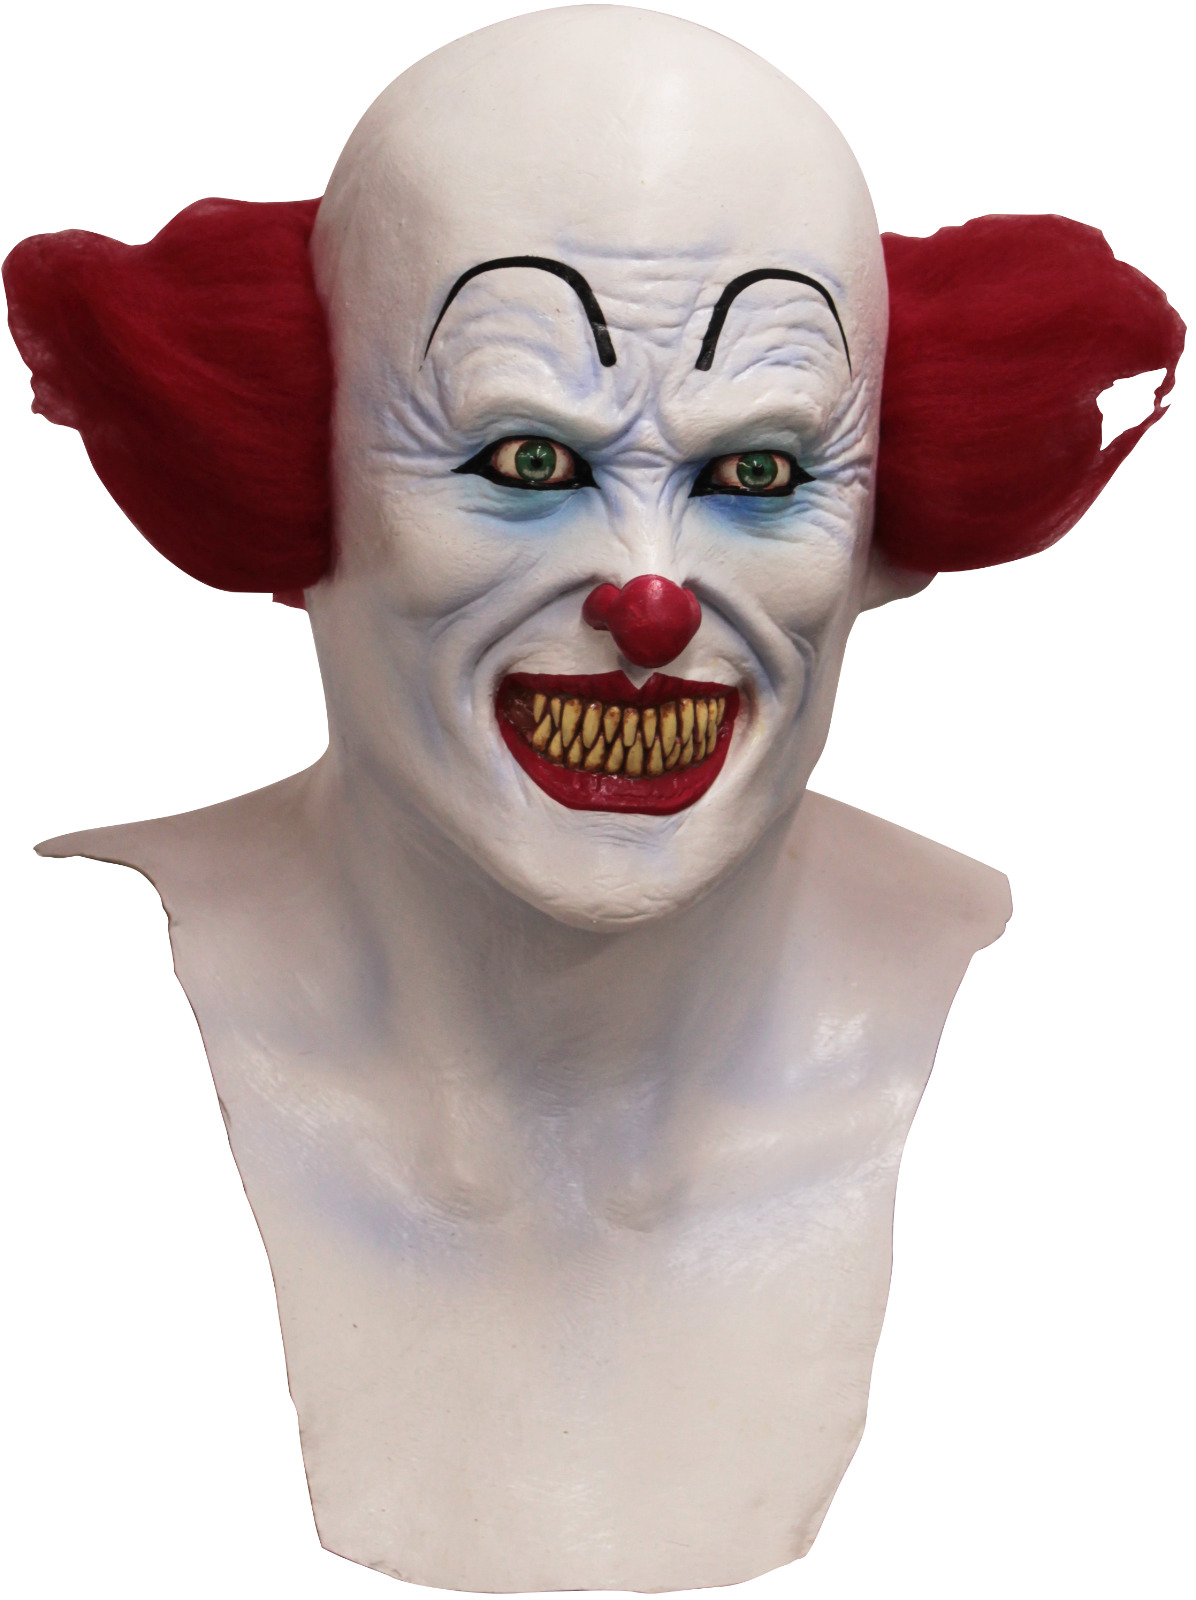 Latex Mask Ghoulish Productions Scary Clown Halloween